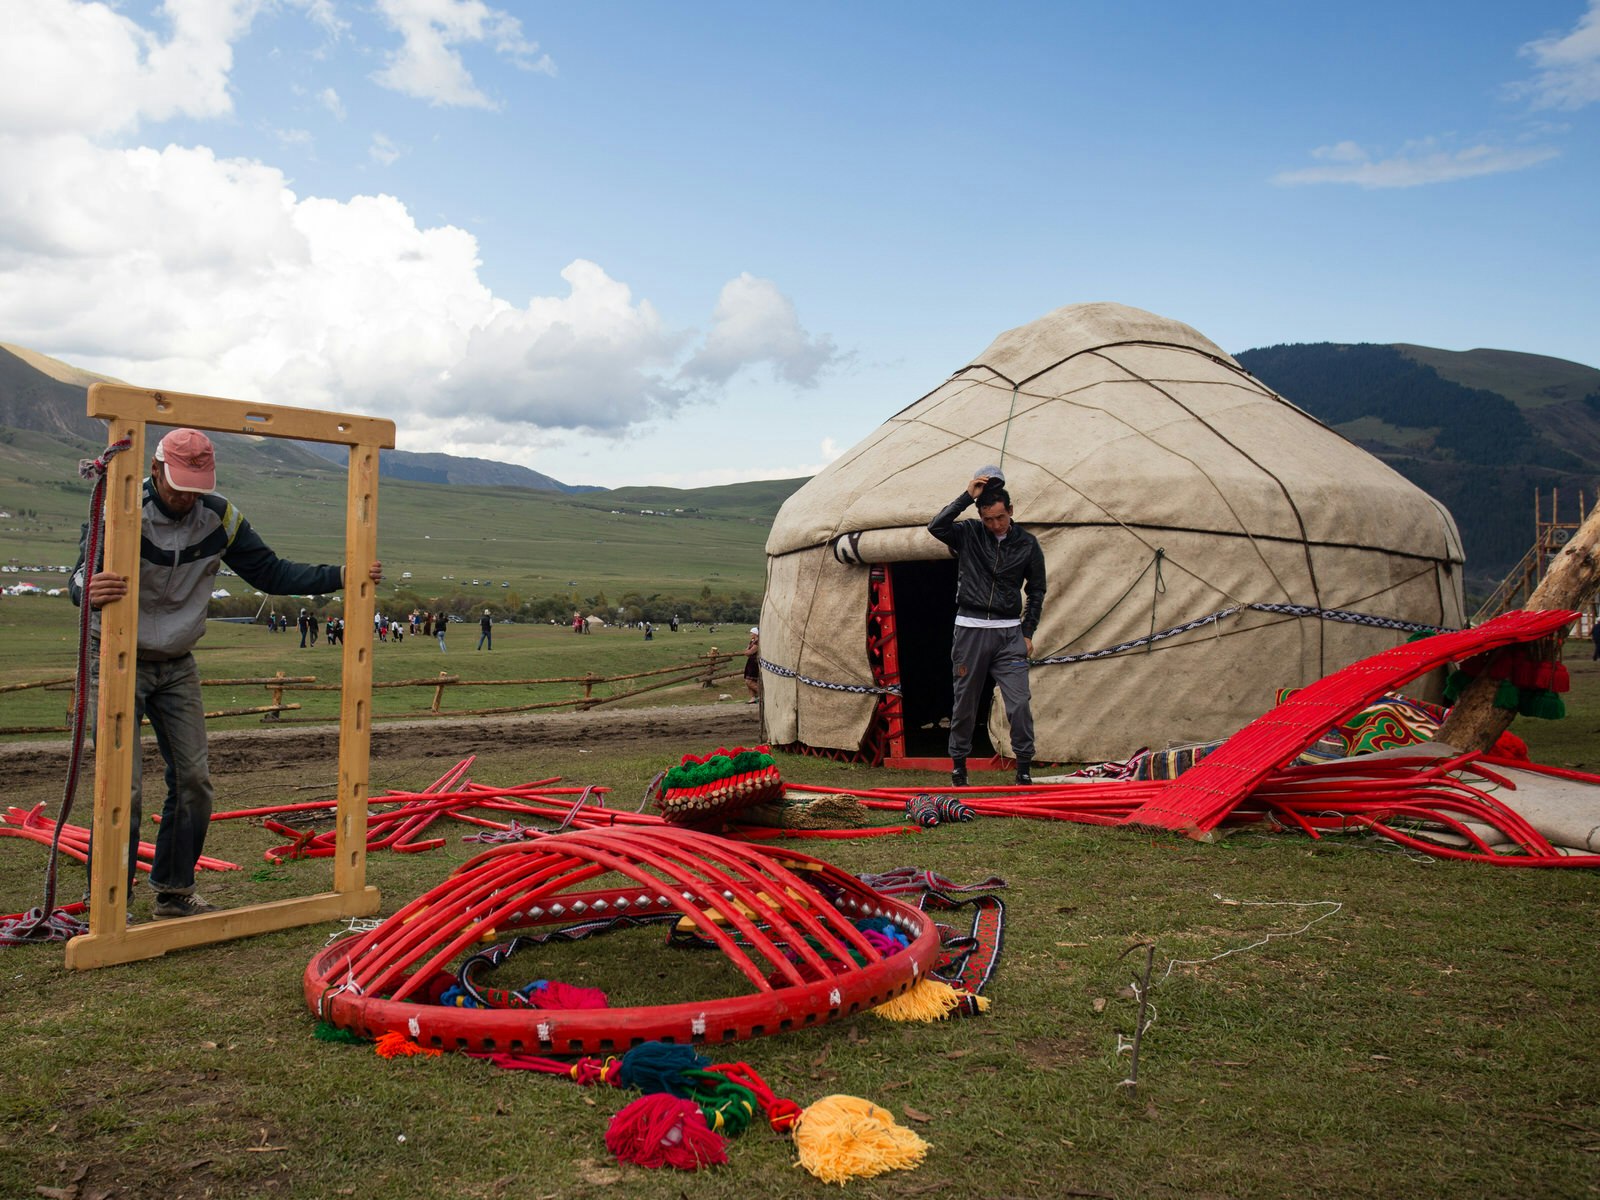 Yurt-builders practice for the timed yurt-building contest at Kyrchyn Jailoo © Stephen Lioy / Lonely Planet